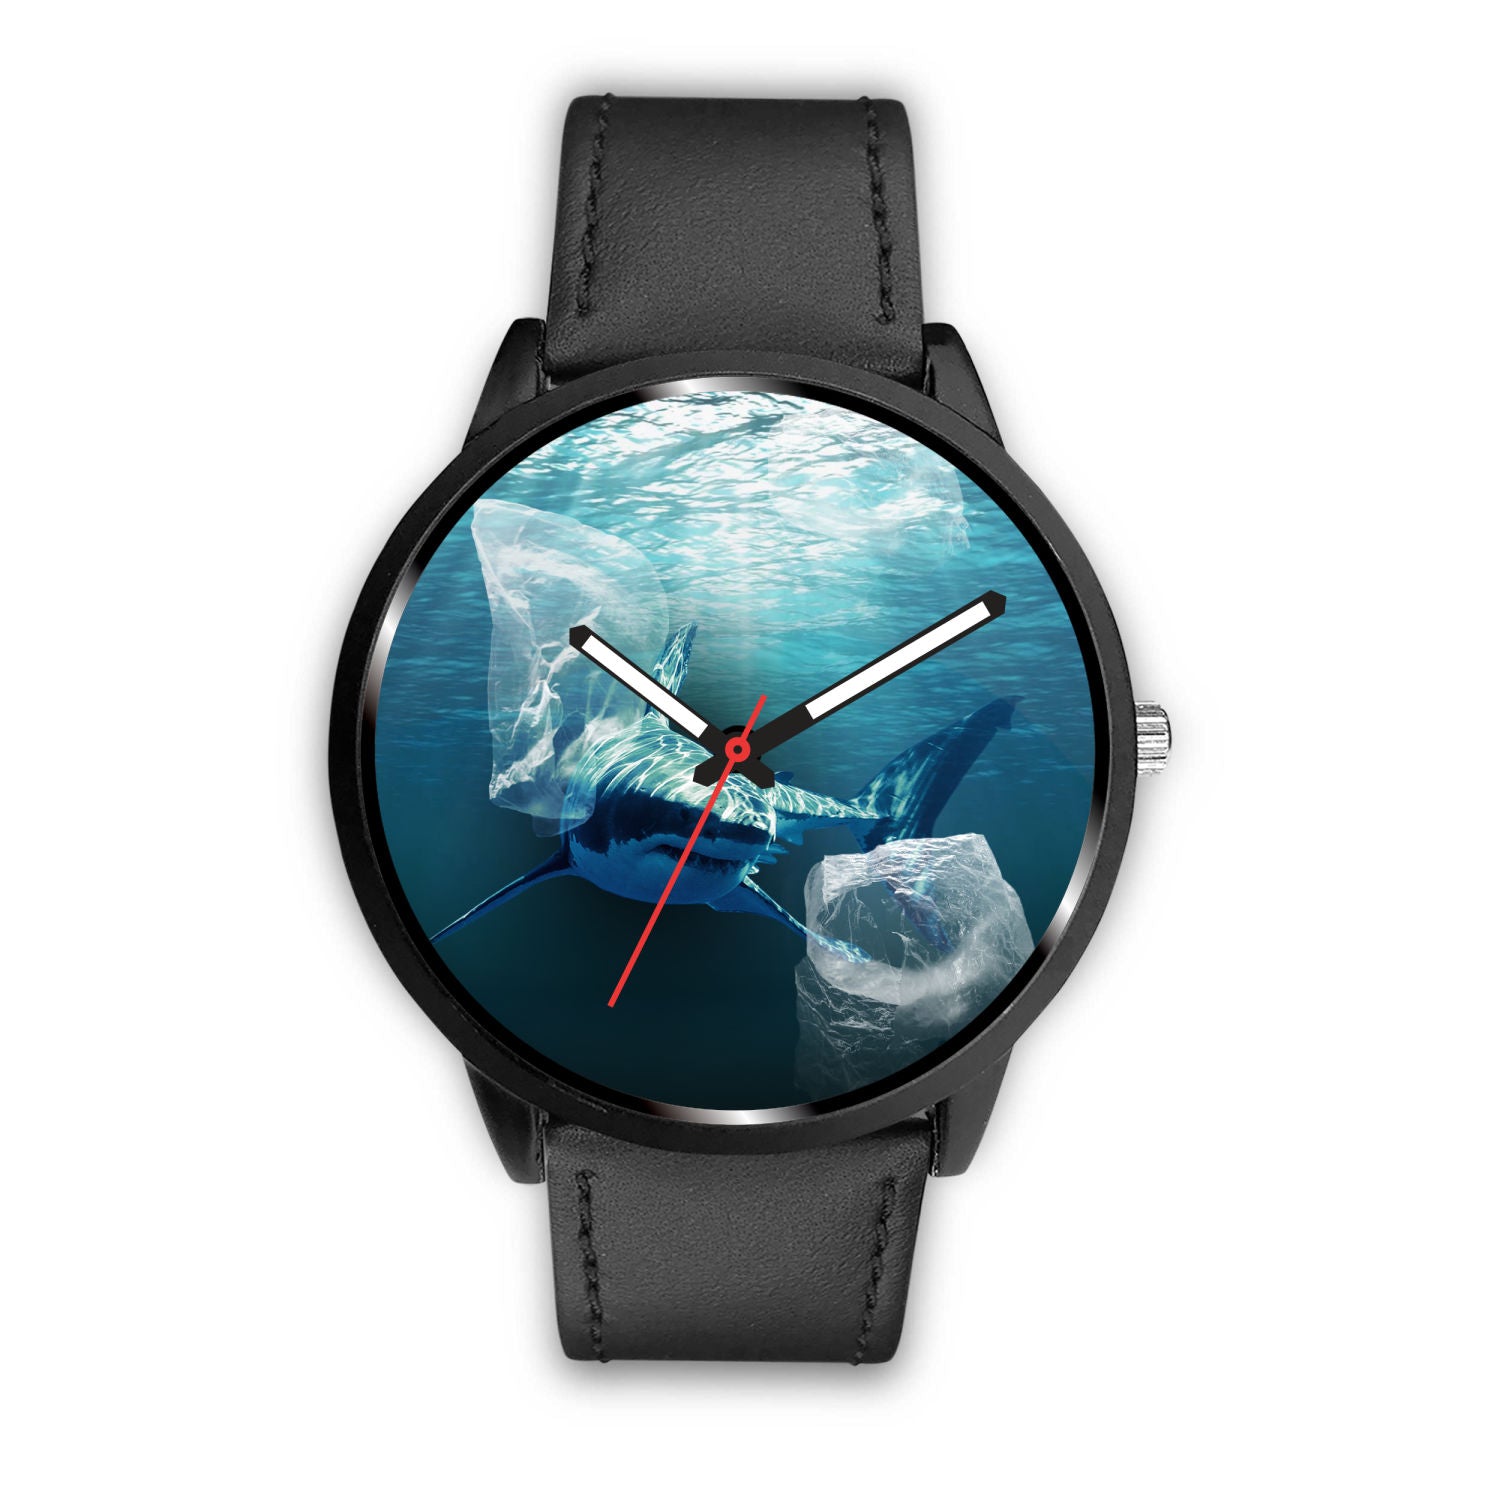 Shark with Plastic Bags, funQy Watch